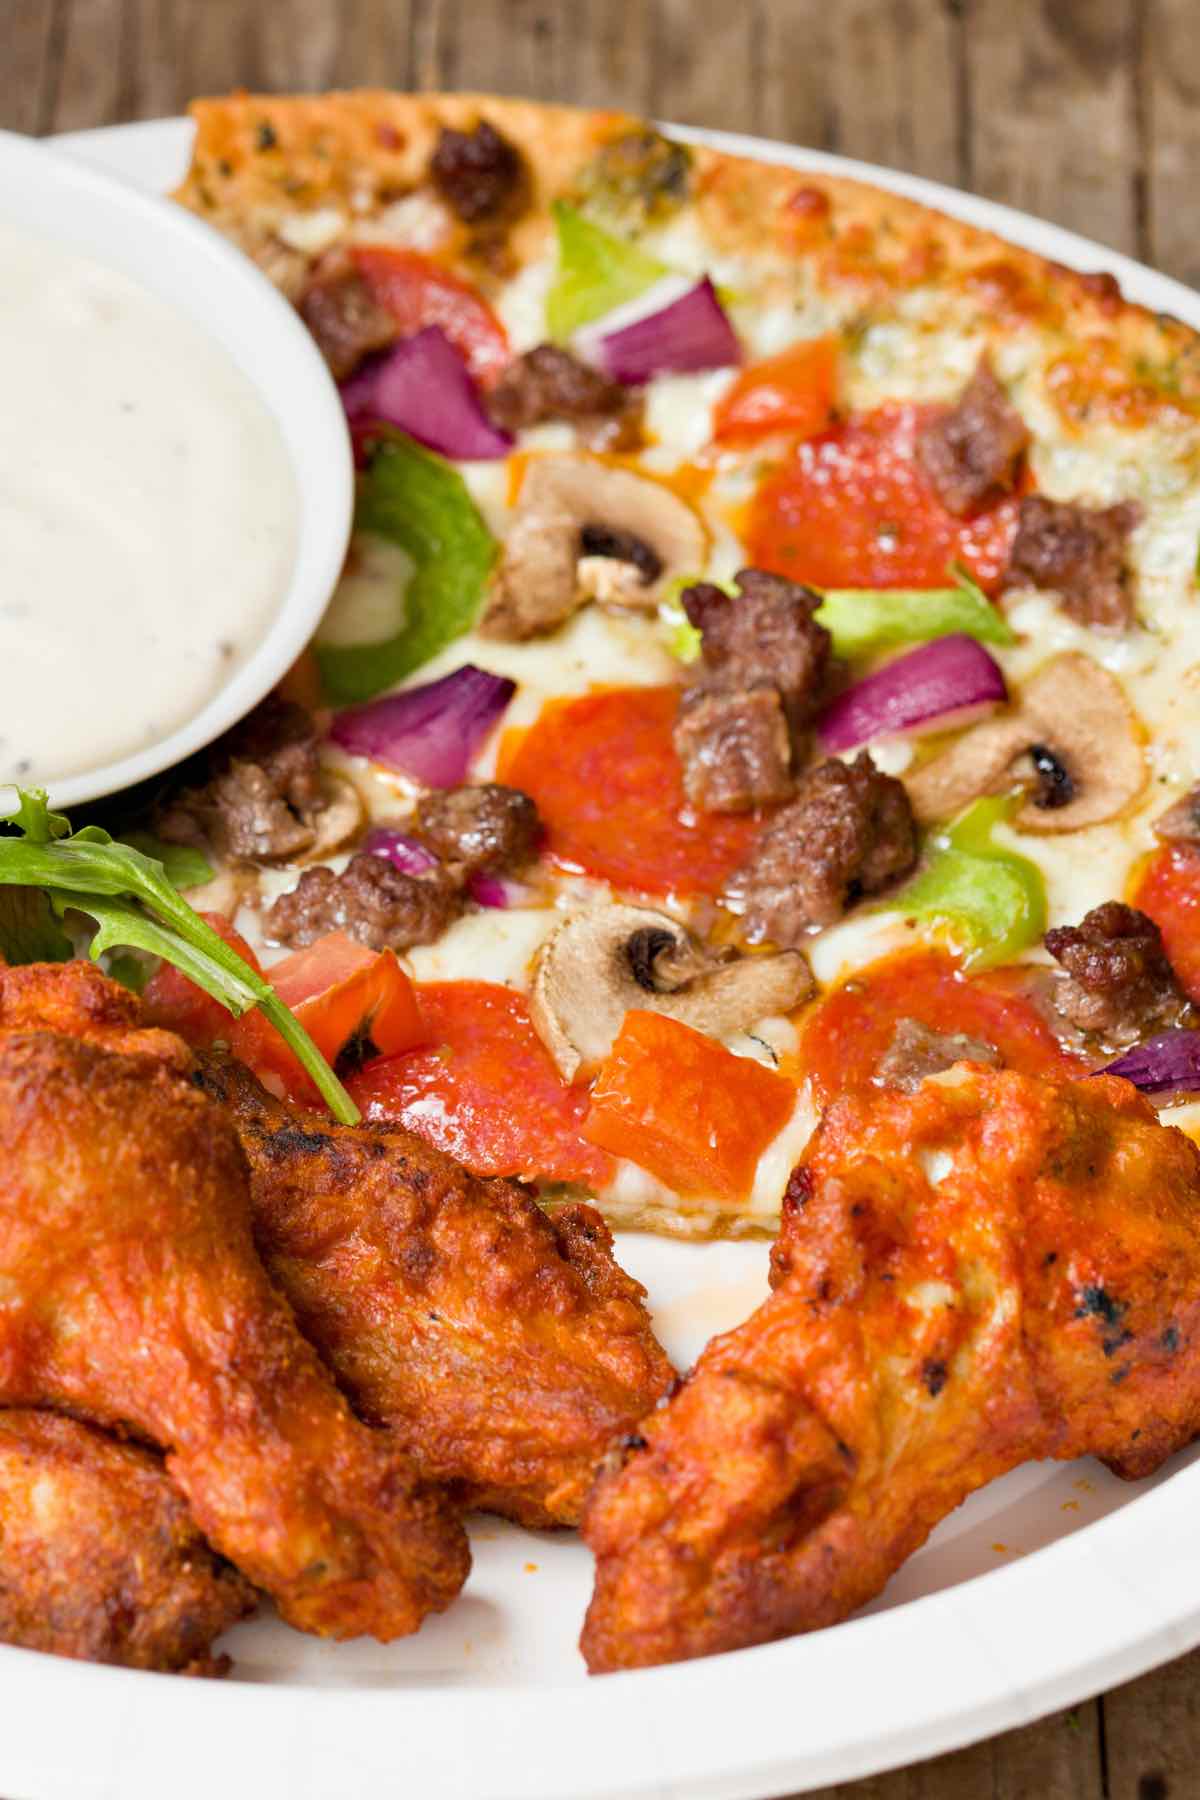 If you're struggling with what to serve with your pizza, you've come to the right place. From healthy vegetables to delicious chicken wings, below you will find 21 of the Best Pizza Sides that will complement your pizza and fill up your guests! 